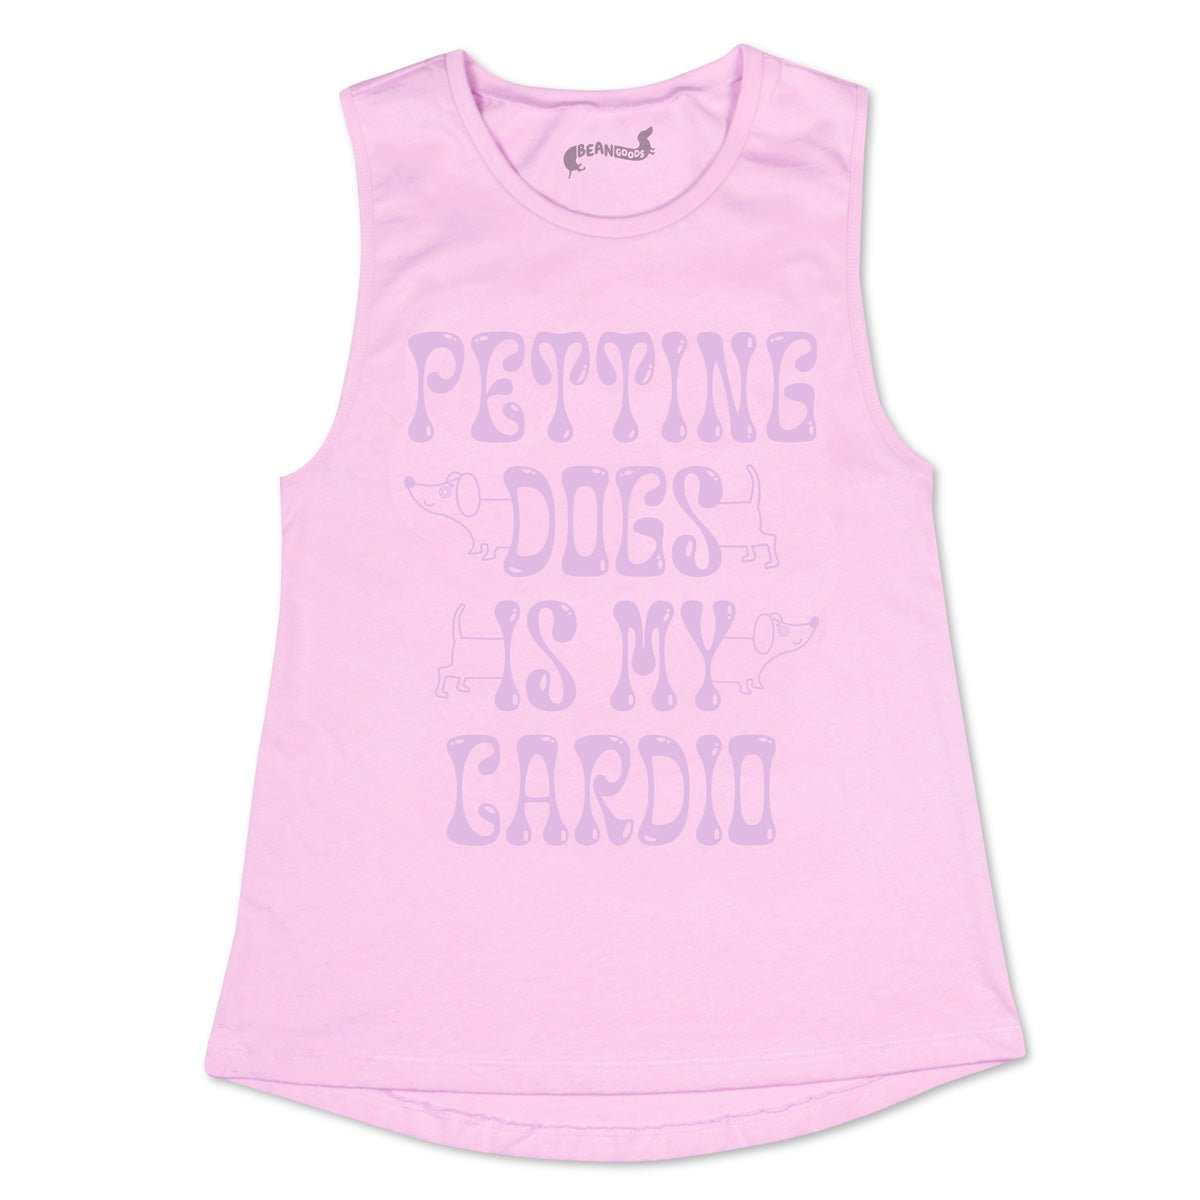 petting dogs is my cardio women's muscle tank - bean goods